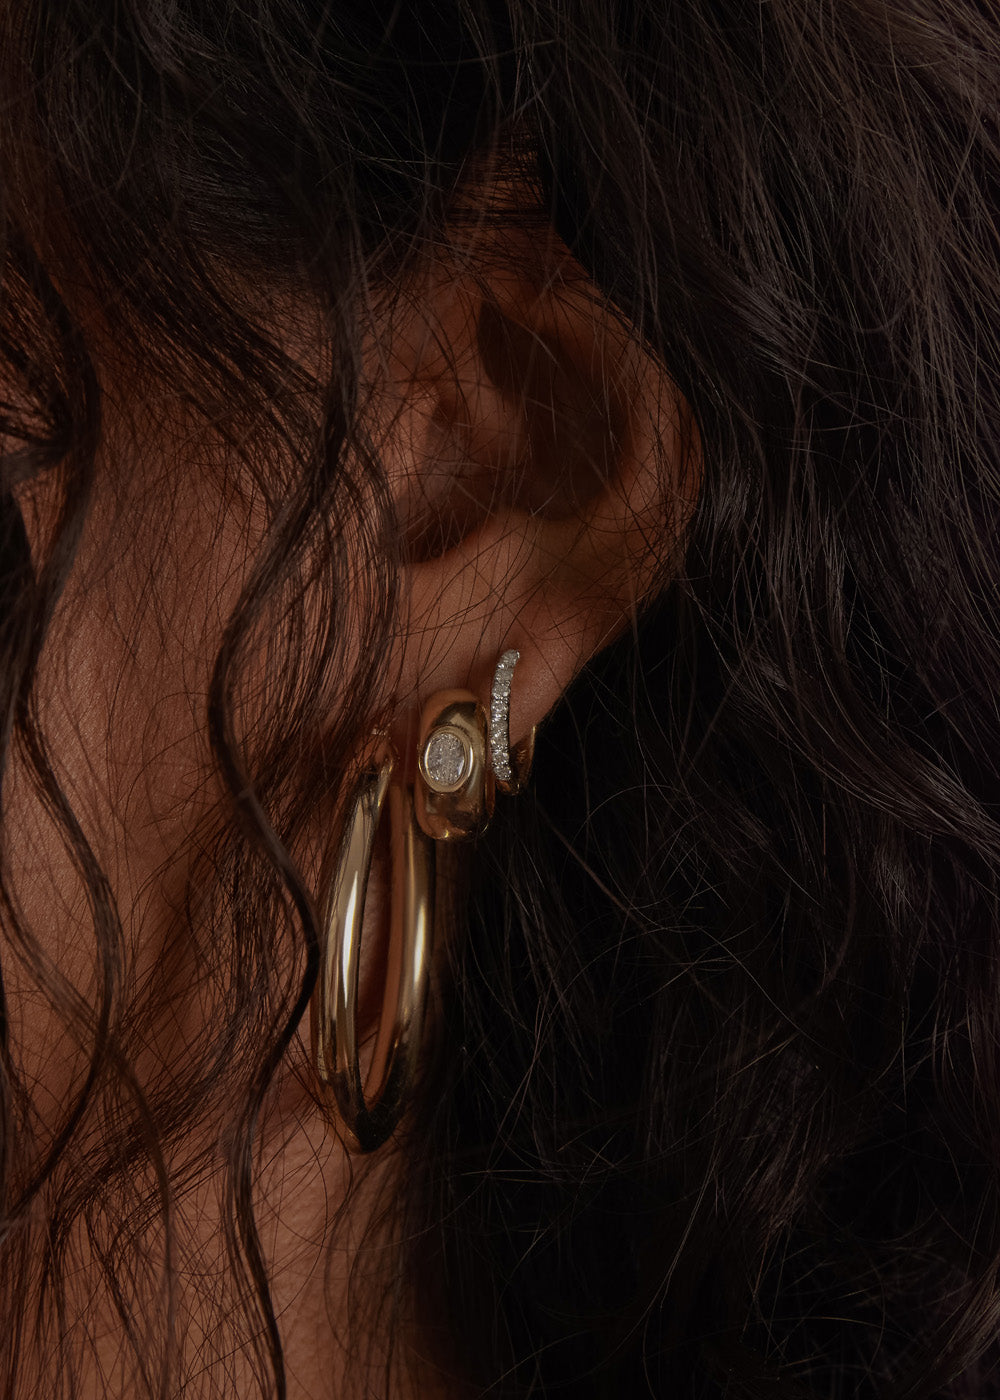 13 Gold Hoop Earrings To Polish Up Your Look